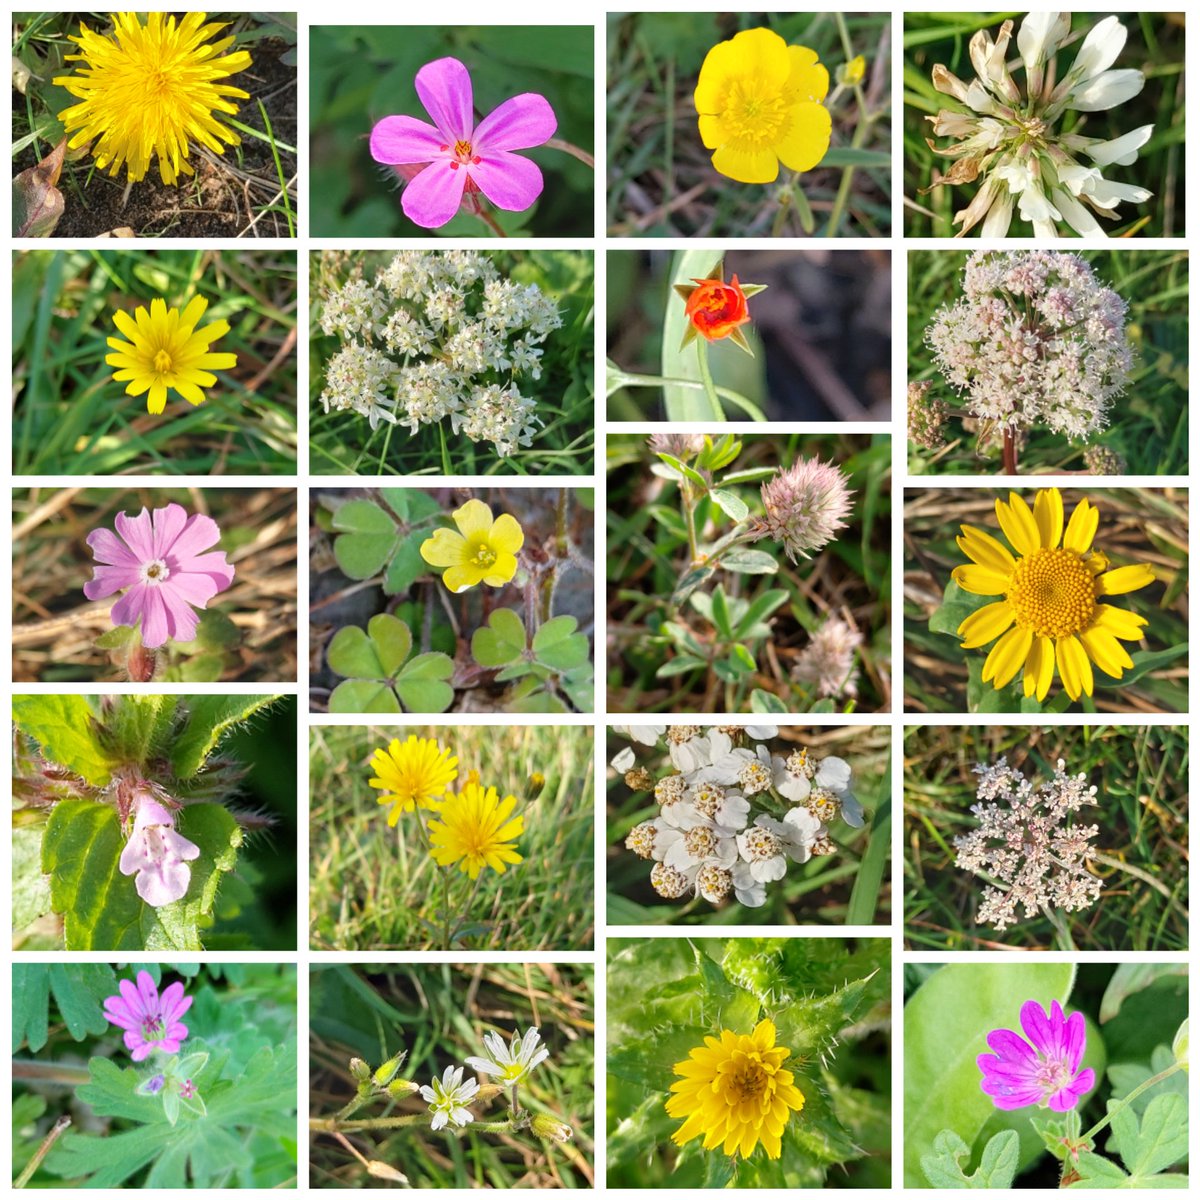 An afternoon stroll around my meadow today resulted in finding 24 wildflowers for #wildflowerhour  More than double the count for #TheWinter10 & too many for the photo collage 😃
Includes 3 Umbellifers, 3 Crane'
s-bills & my favourite this week Hare's-foot Clover